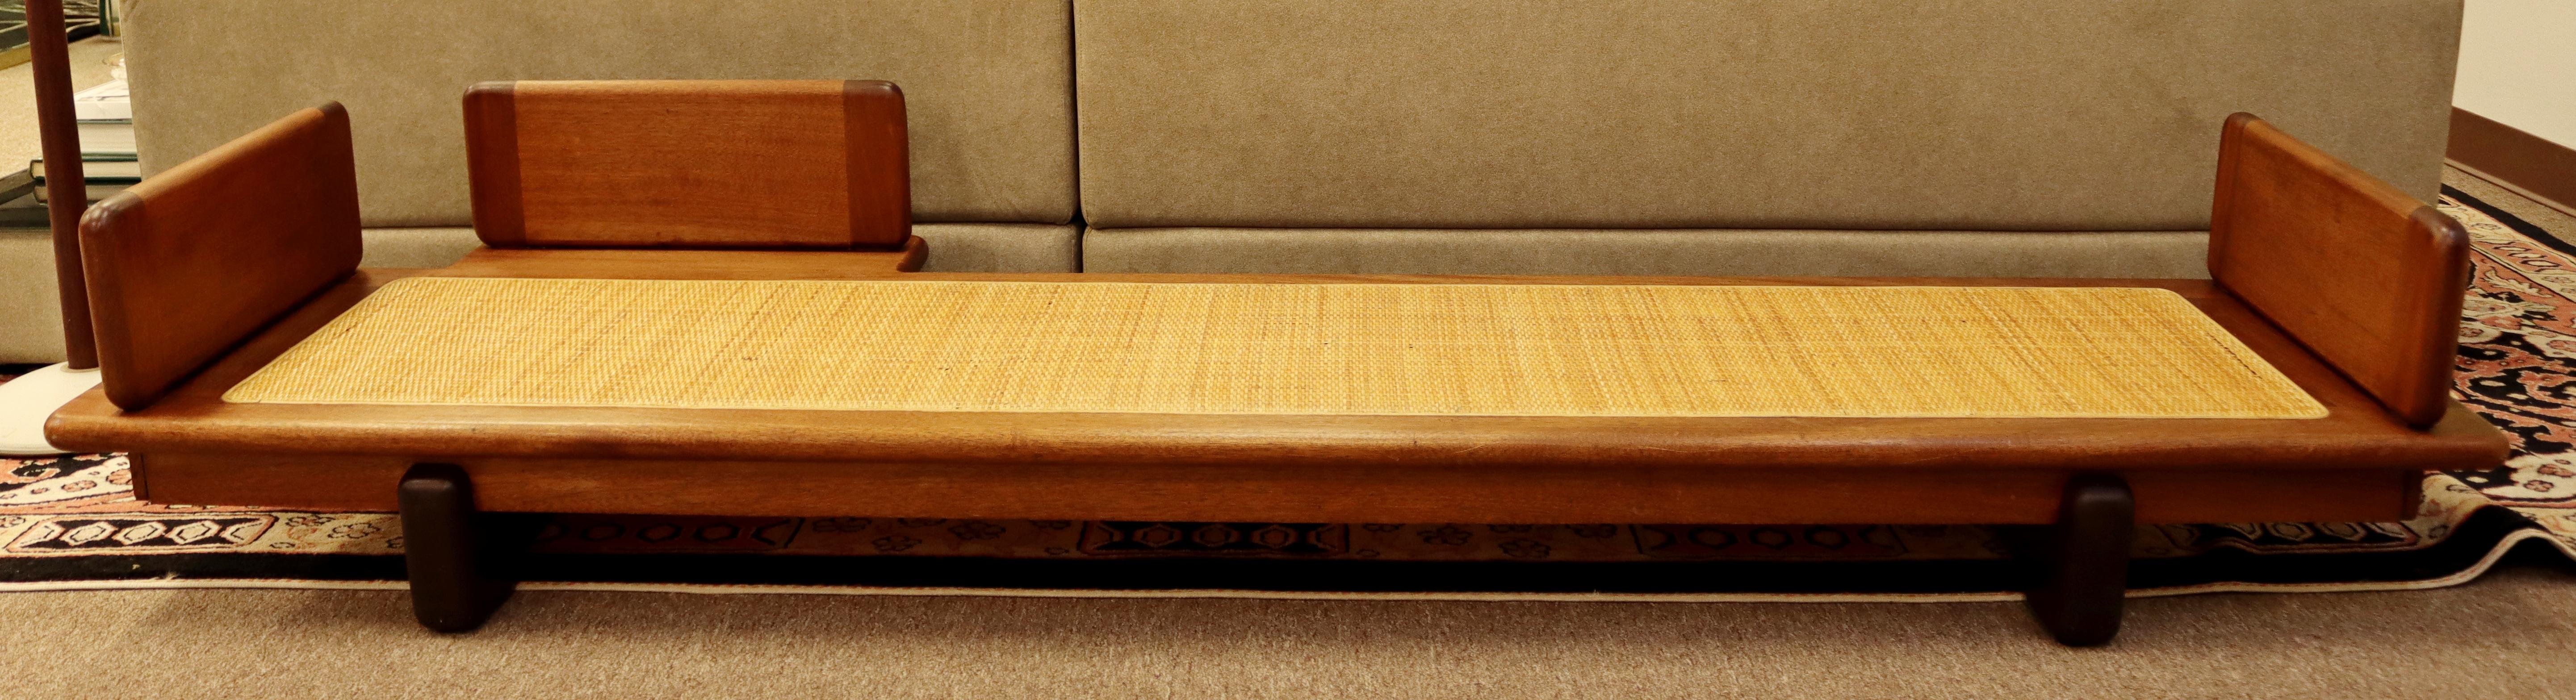 For your consideration is a lovely and long, low bench, made of wood and with a rattan seat, by an artist from Cranbrook, circa the 1960s. In excellent vintage condition. The dimensions are 82